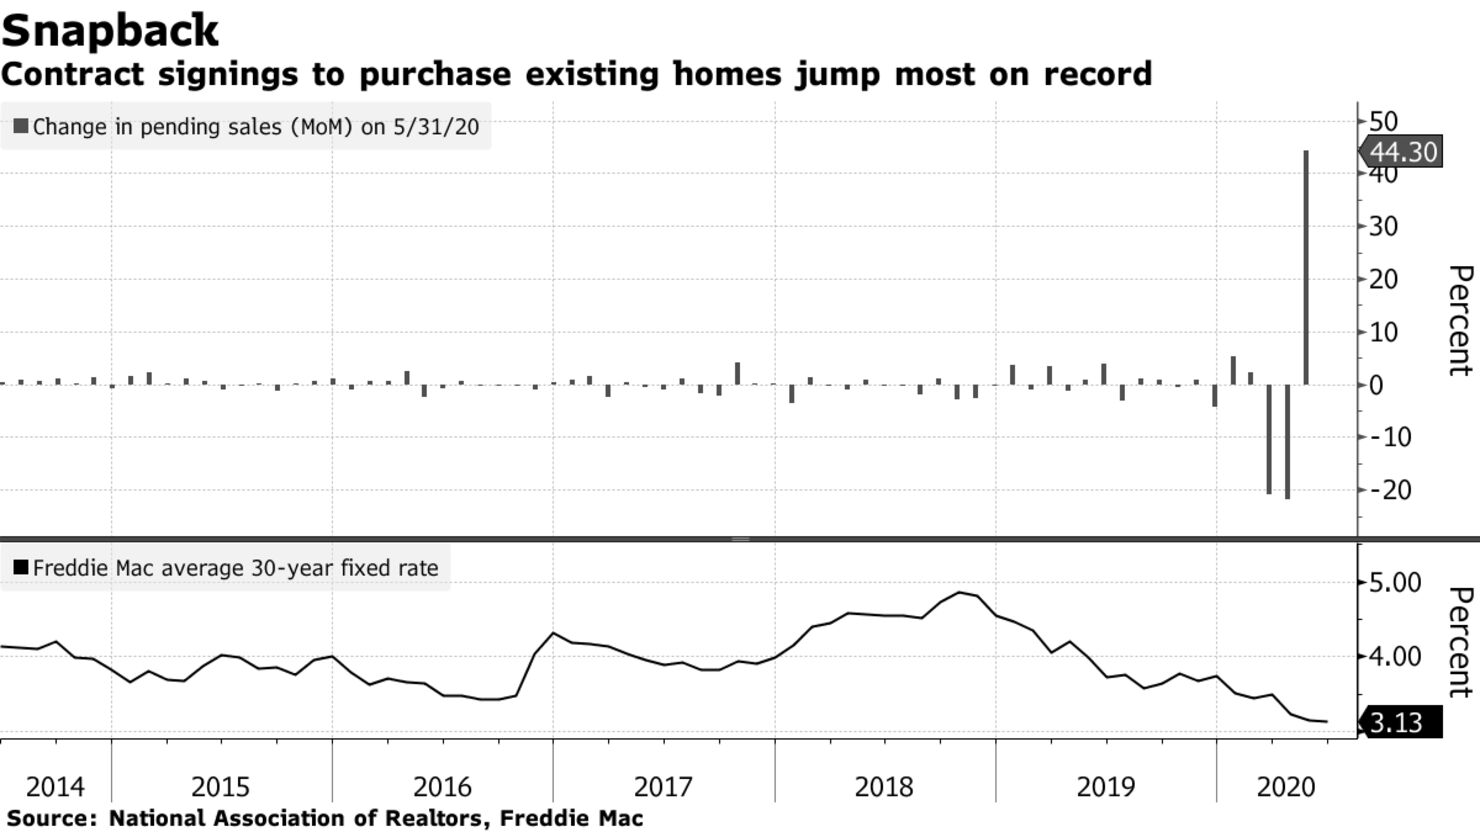 Contract signings to purchase existing homes jump most on record